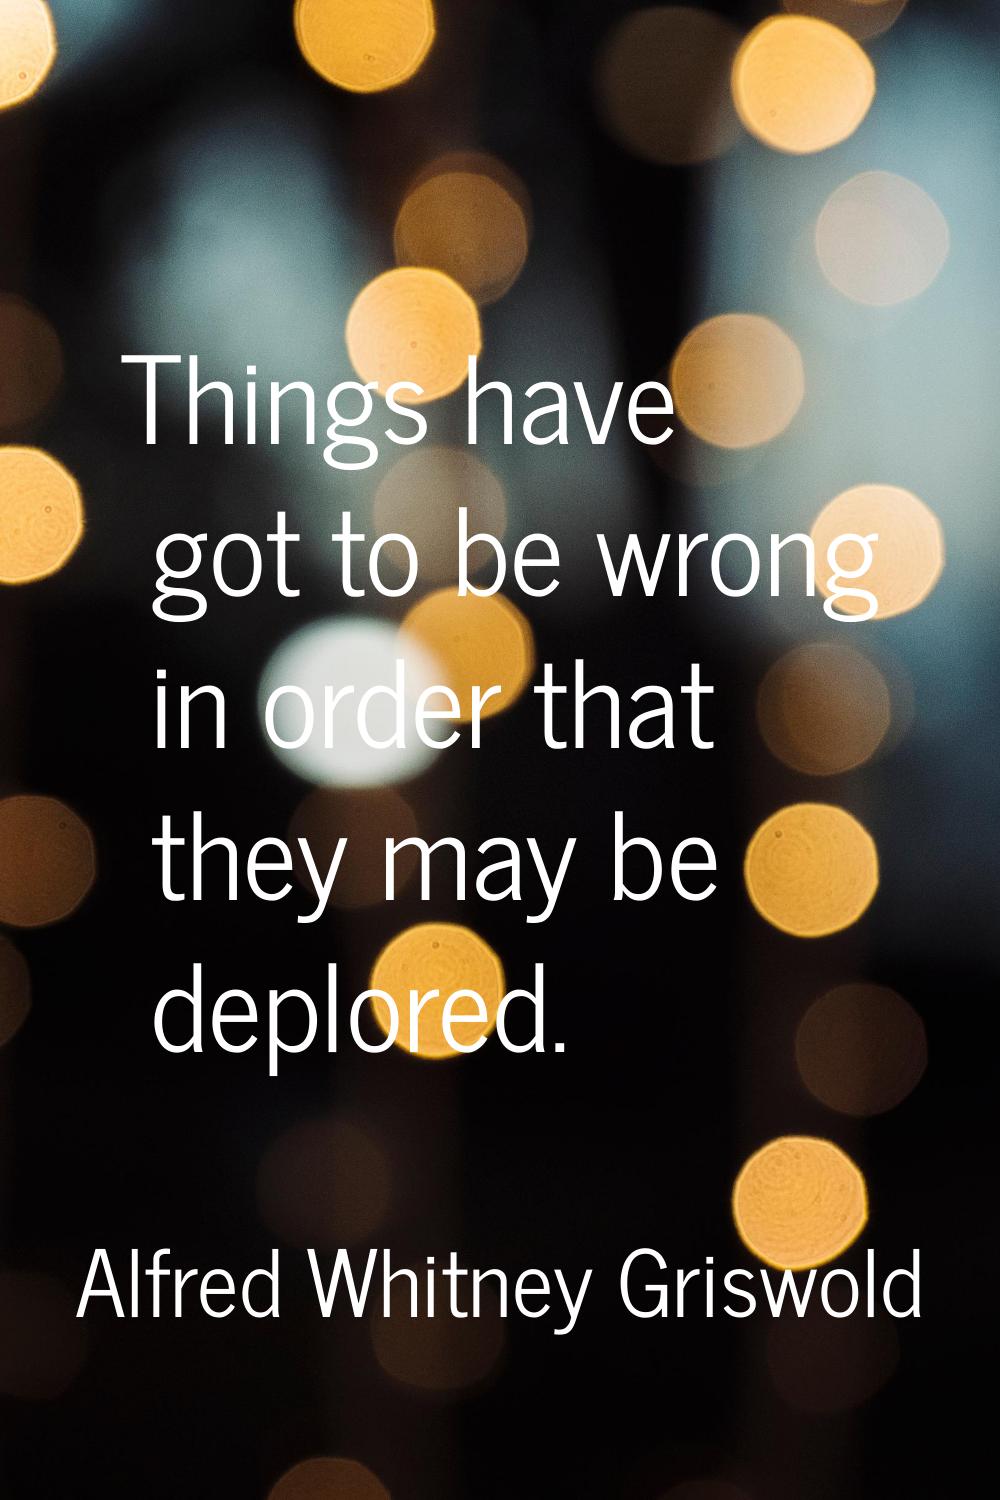 Things have got to be wrong in order that they may be deplored.